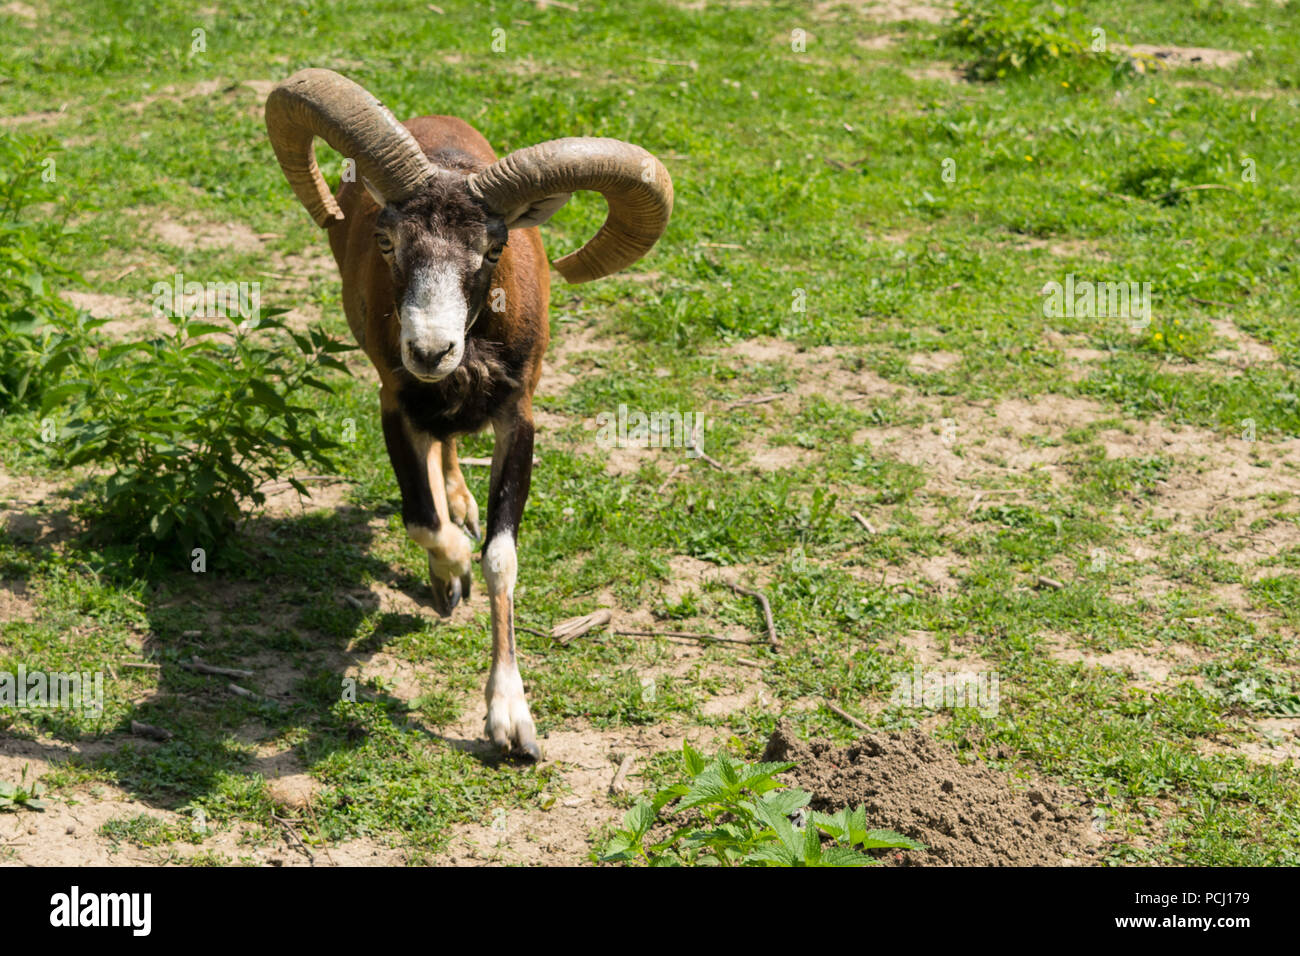 One mouflon (Ovis orientalis orientalis) looking directly in the camera close-up with copy space Stock Photo